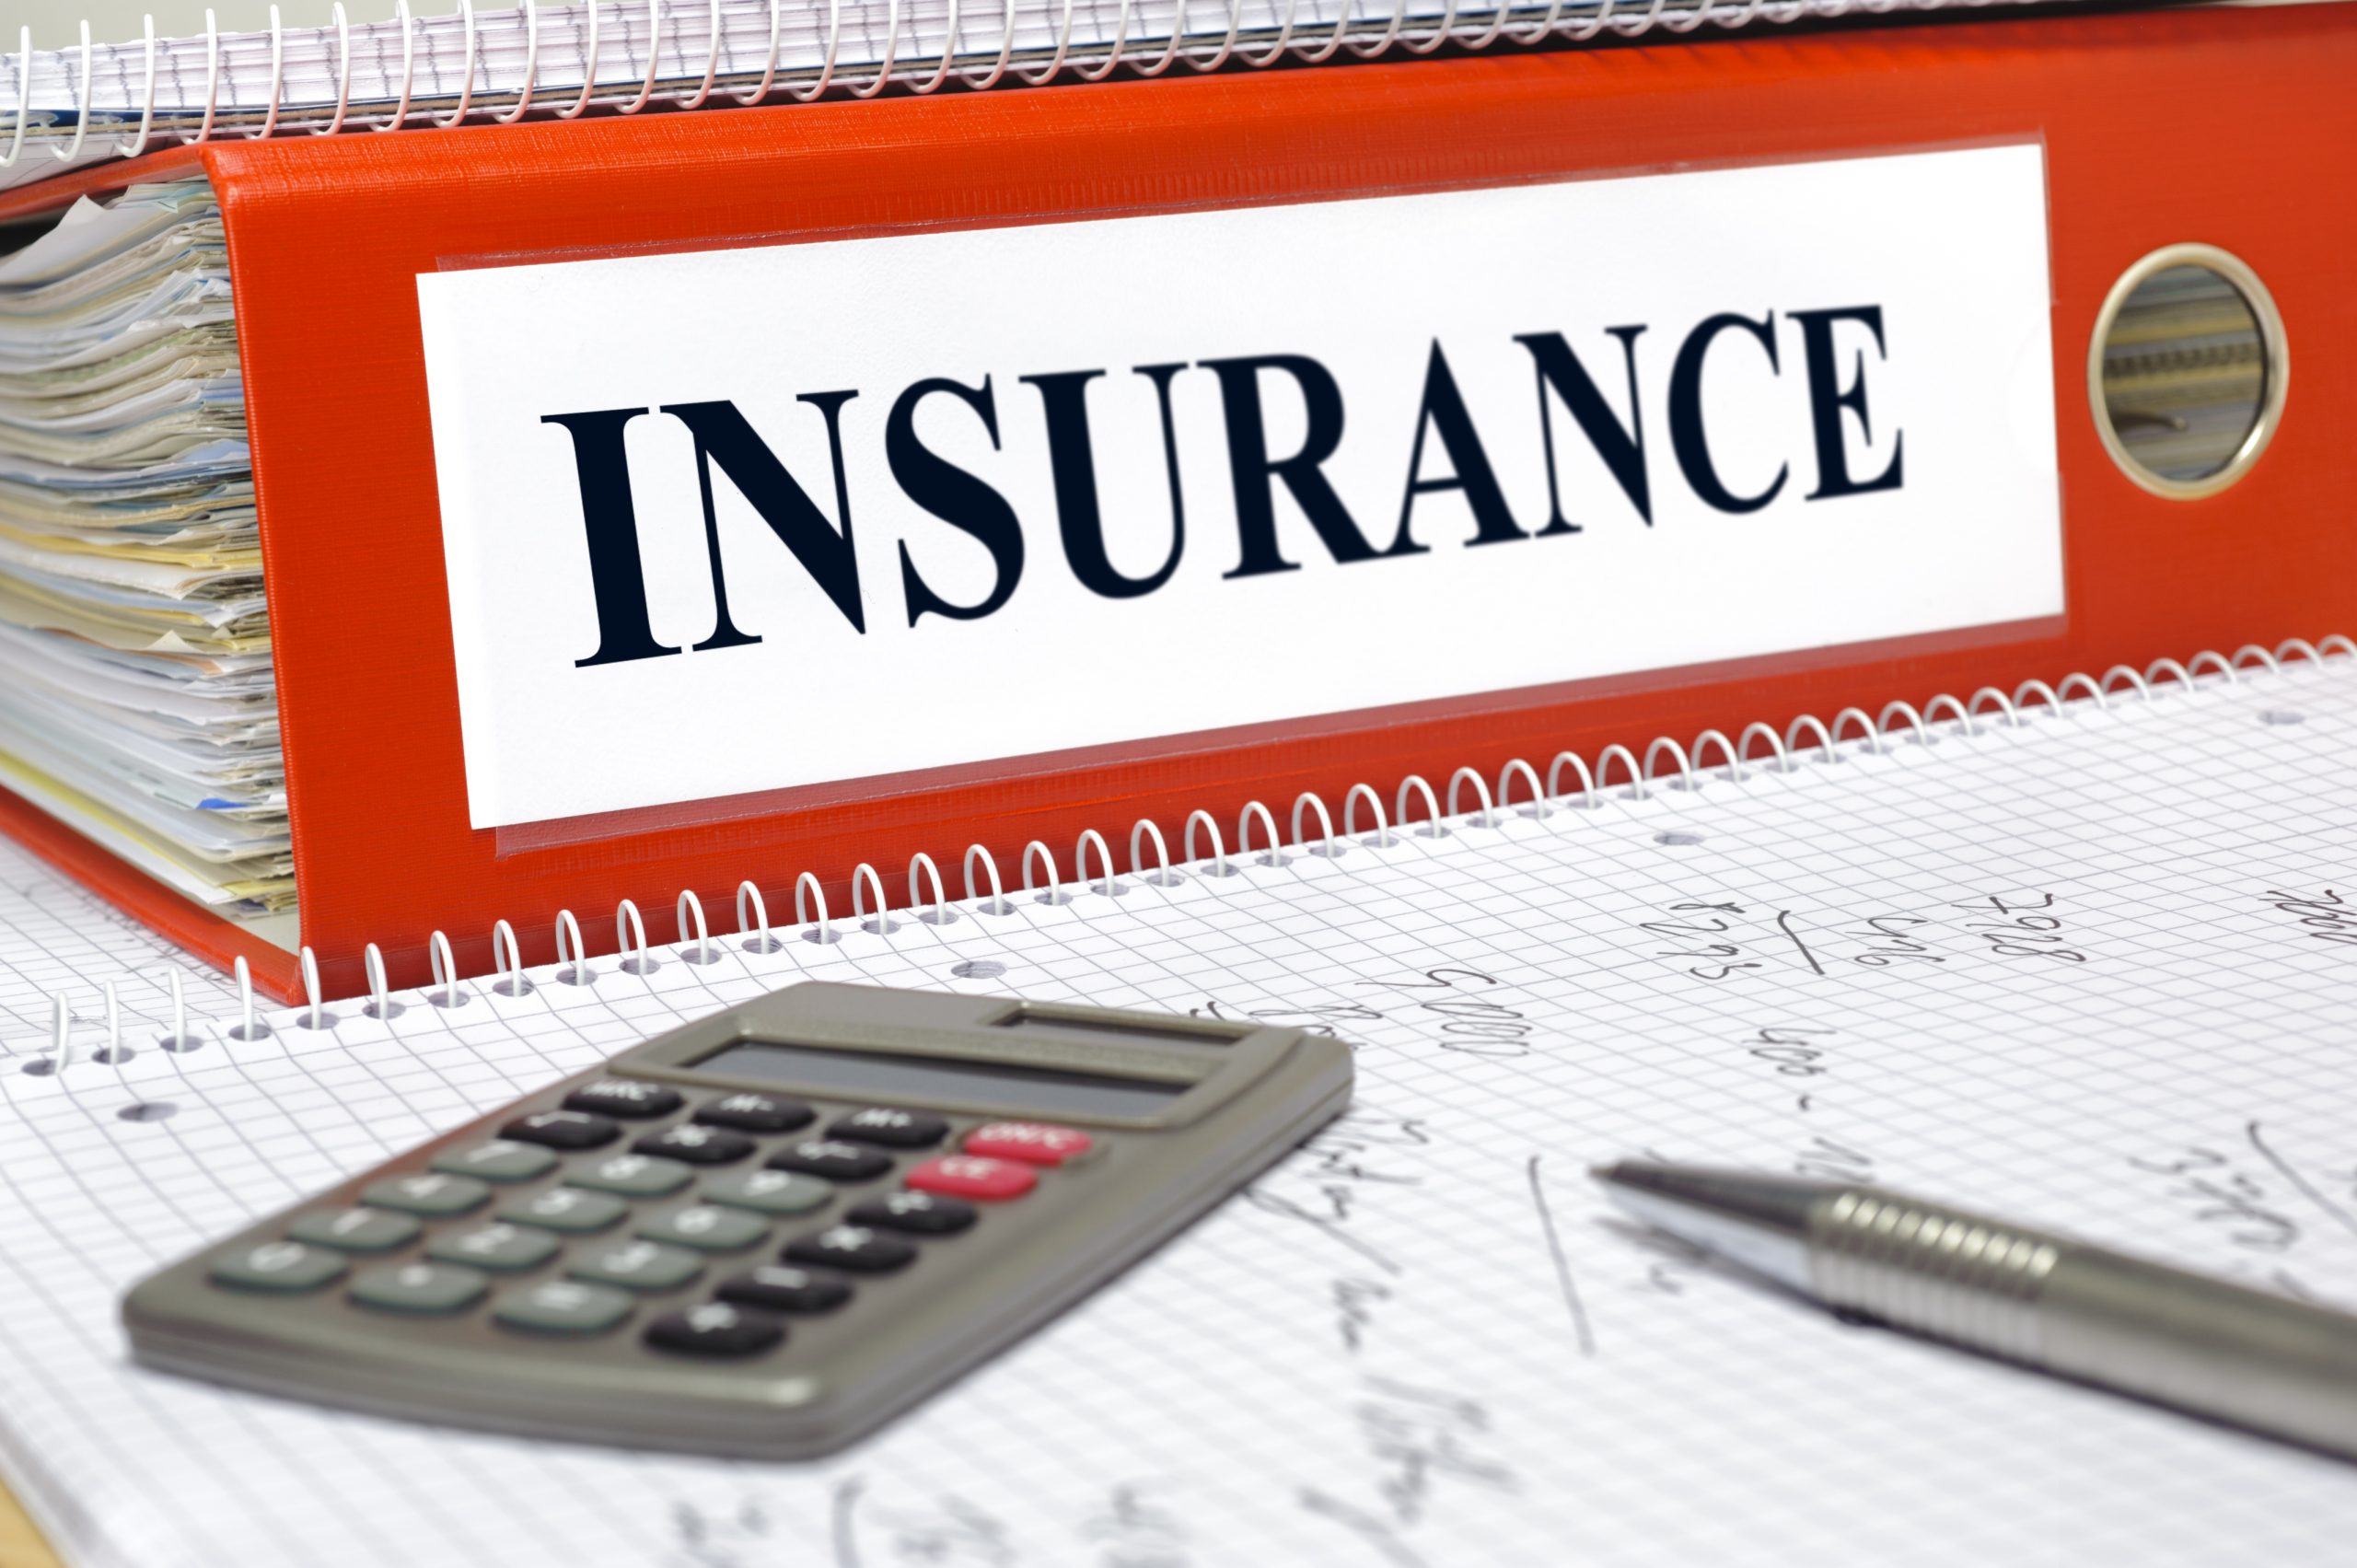 Contact your local TDs – ‘We need to make insurance affordable’ says RGDATA